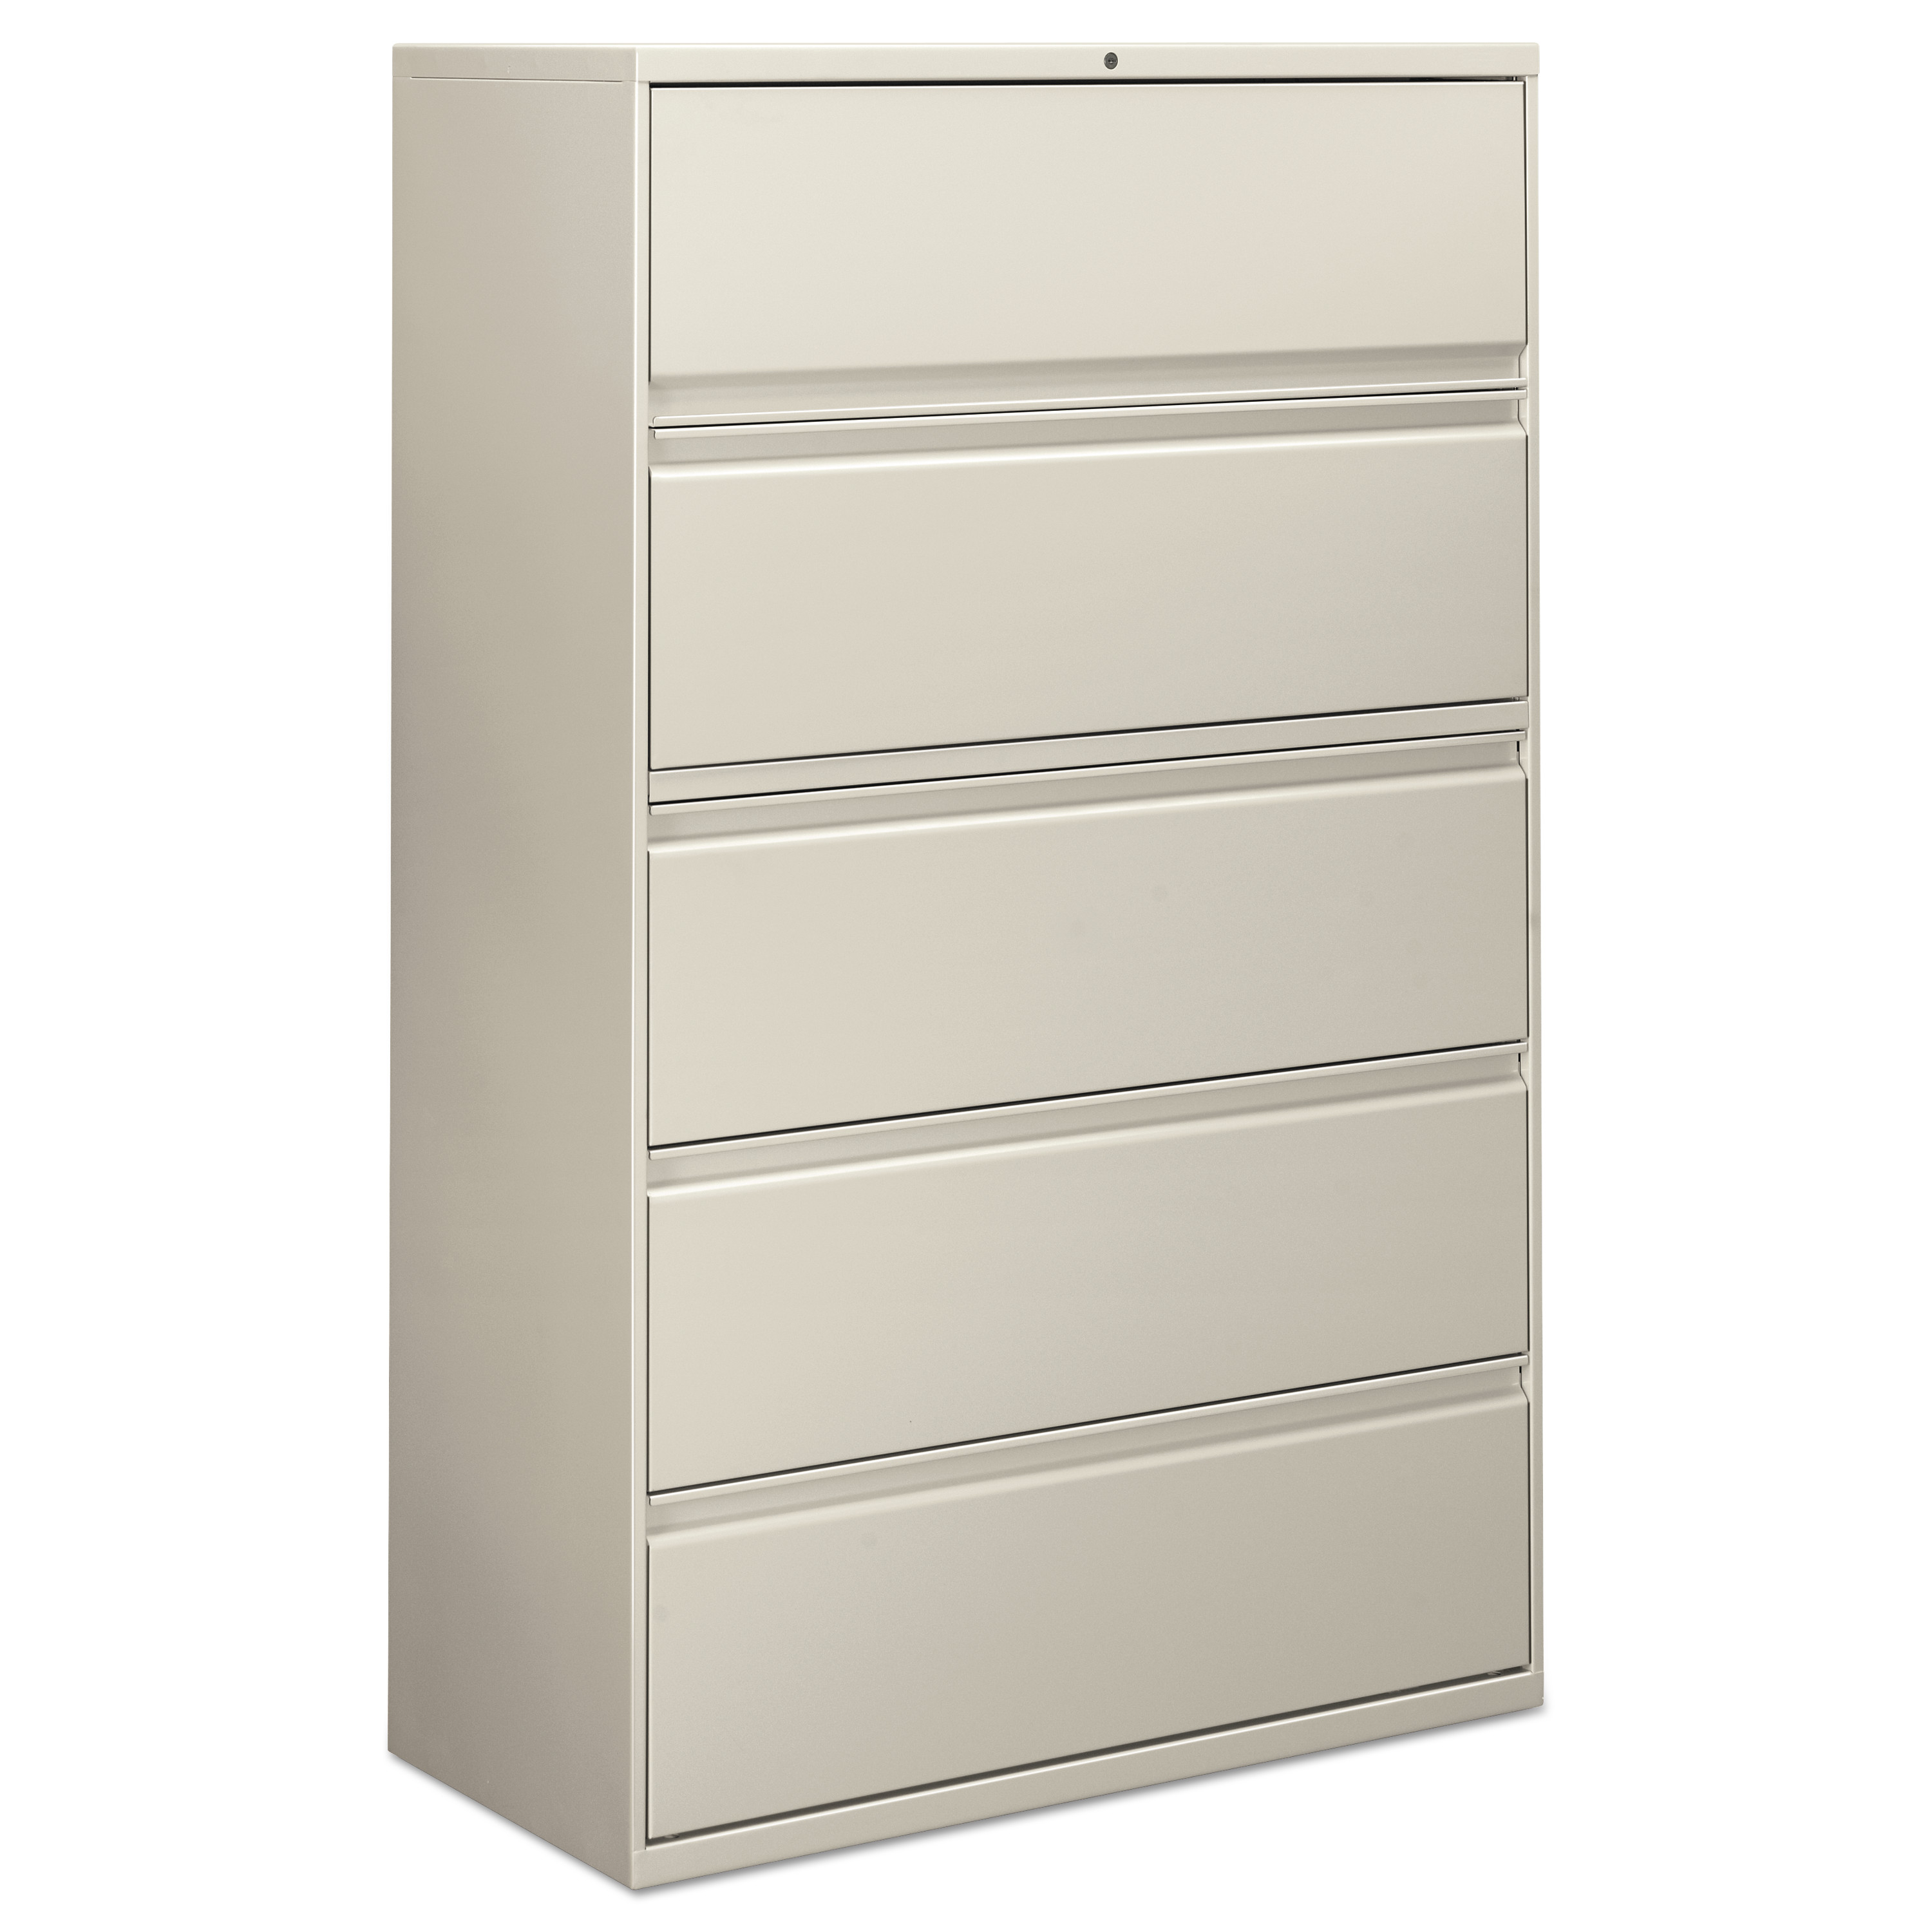 Alera Five-Drawer Lateral File Cabinet, 42w x 18d x 64.25h, Light Gray -ALELF4267LG - image 1 of 2